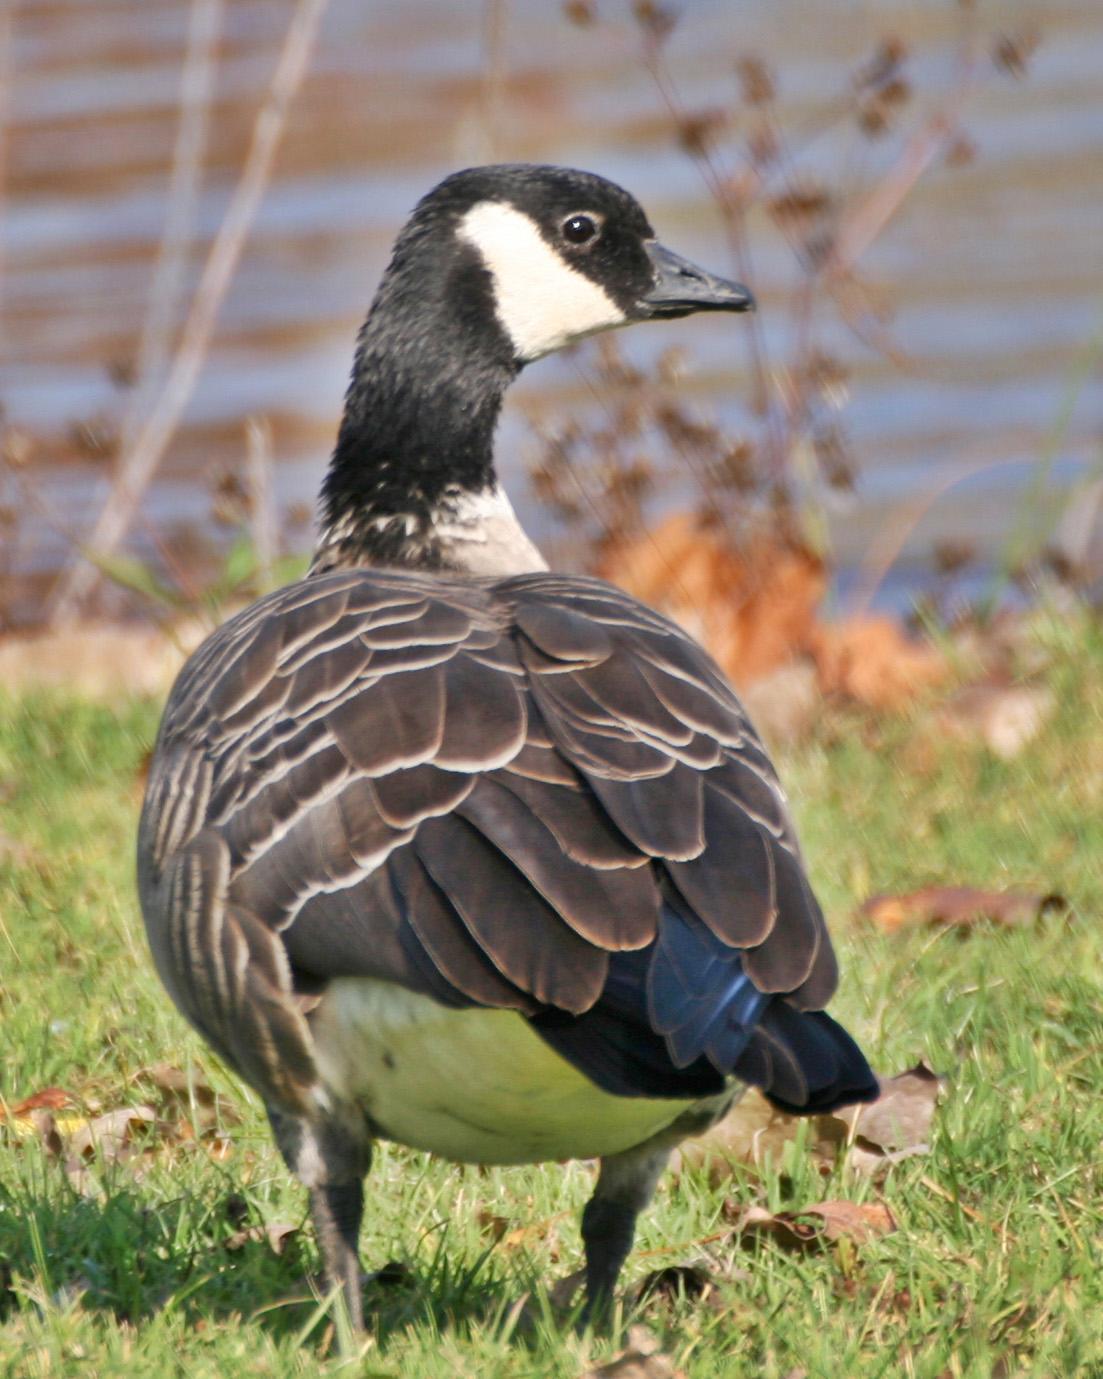 Cackling Goose Photo by Andrew Theus